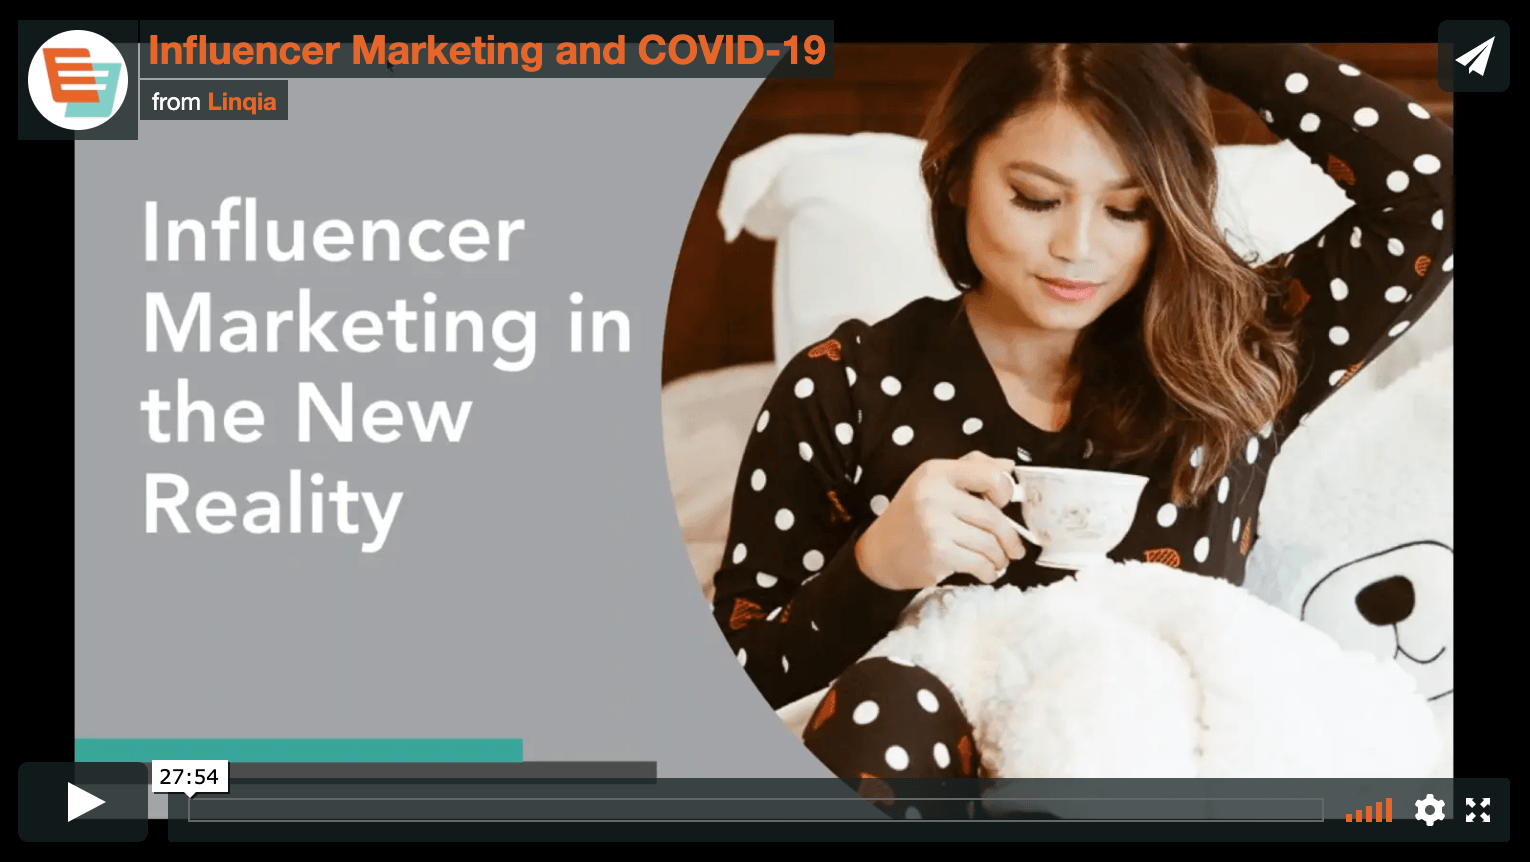 Influencer Marketing and COVID-19